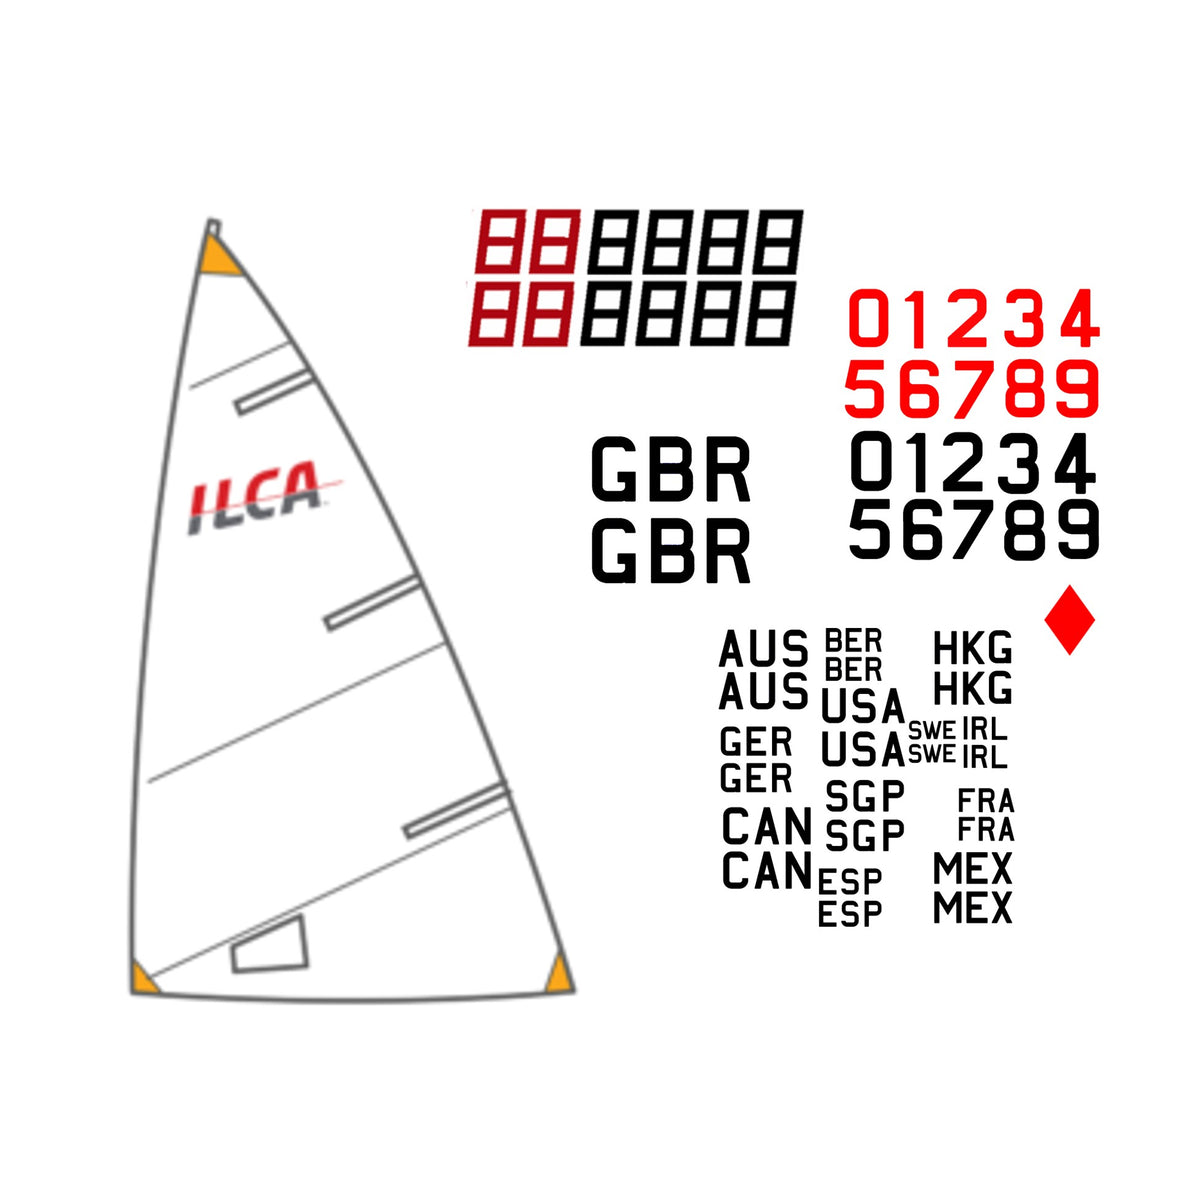 ILCA 4 Sail Bundle - Sail, Numbers and Country Codes